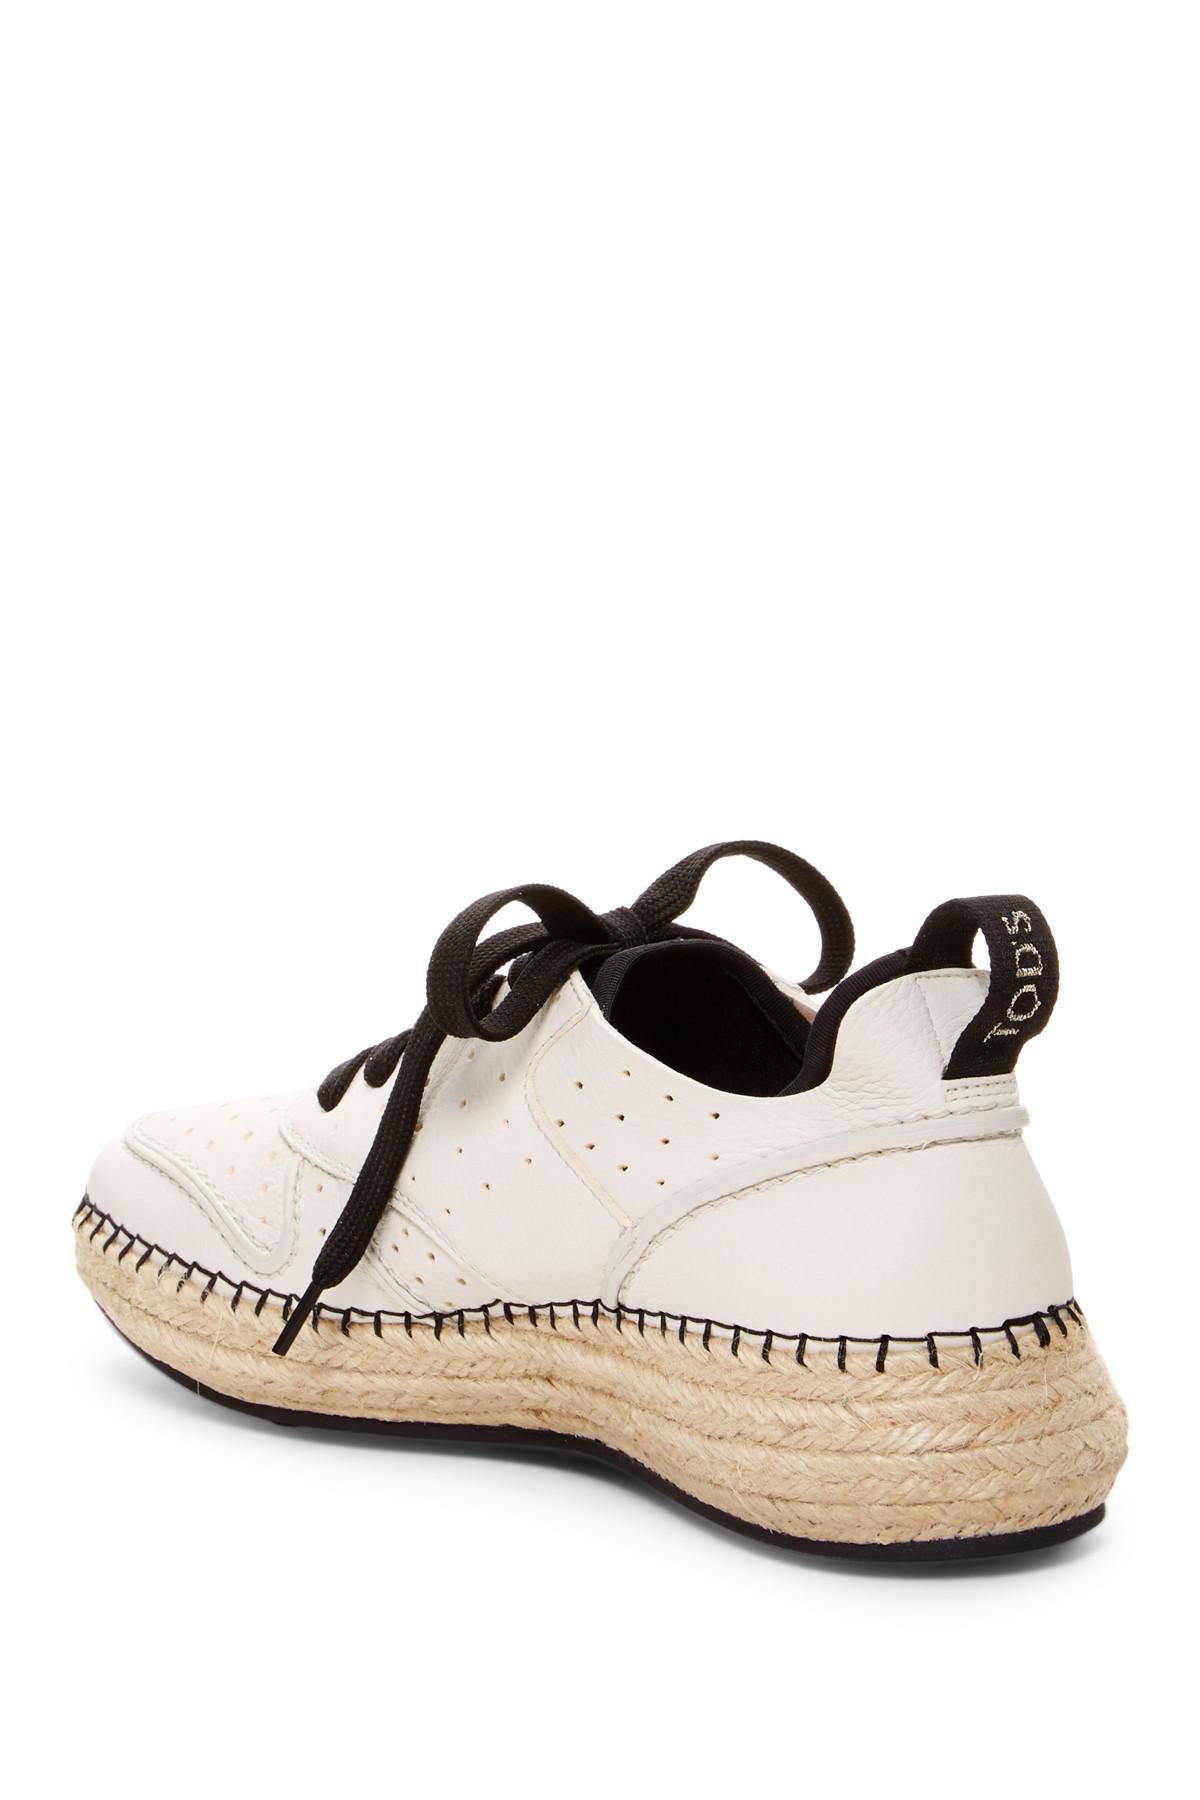 Tod's Leather Espadrille Wedge Sneaker 